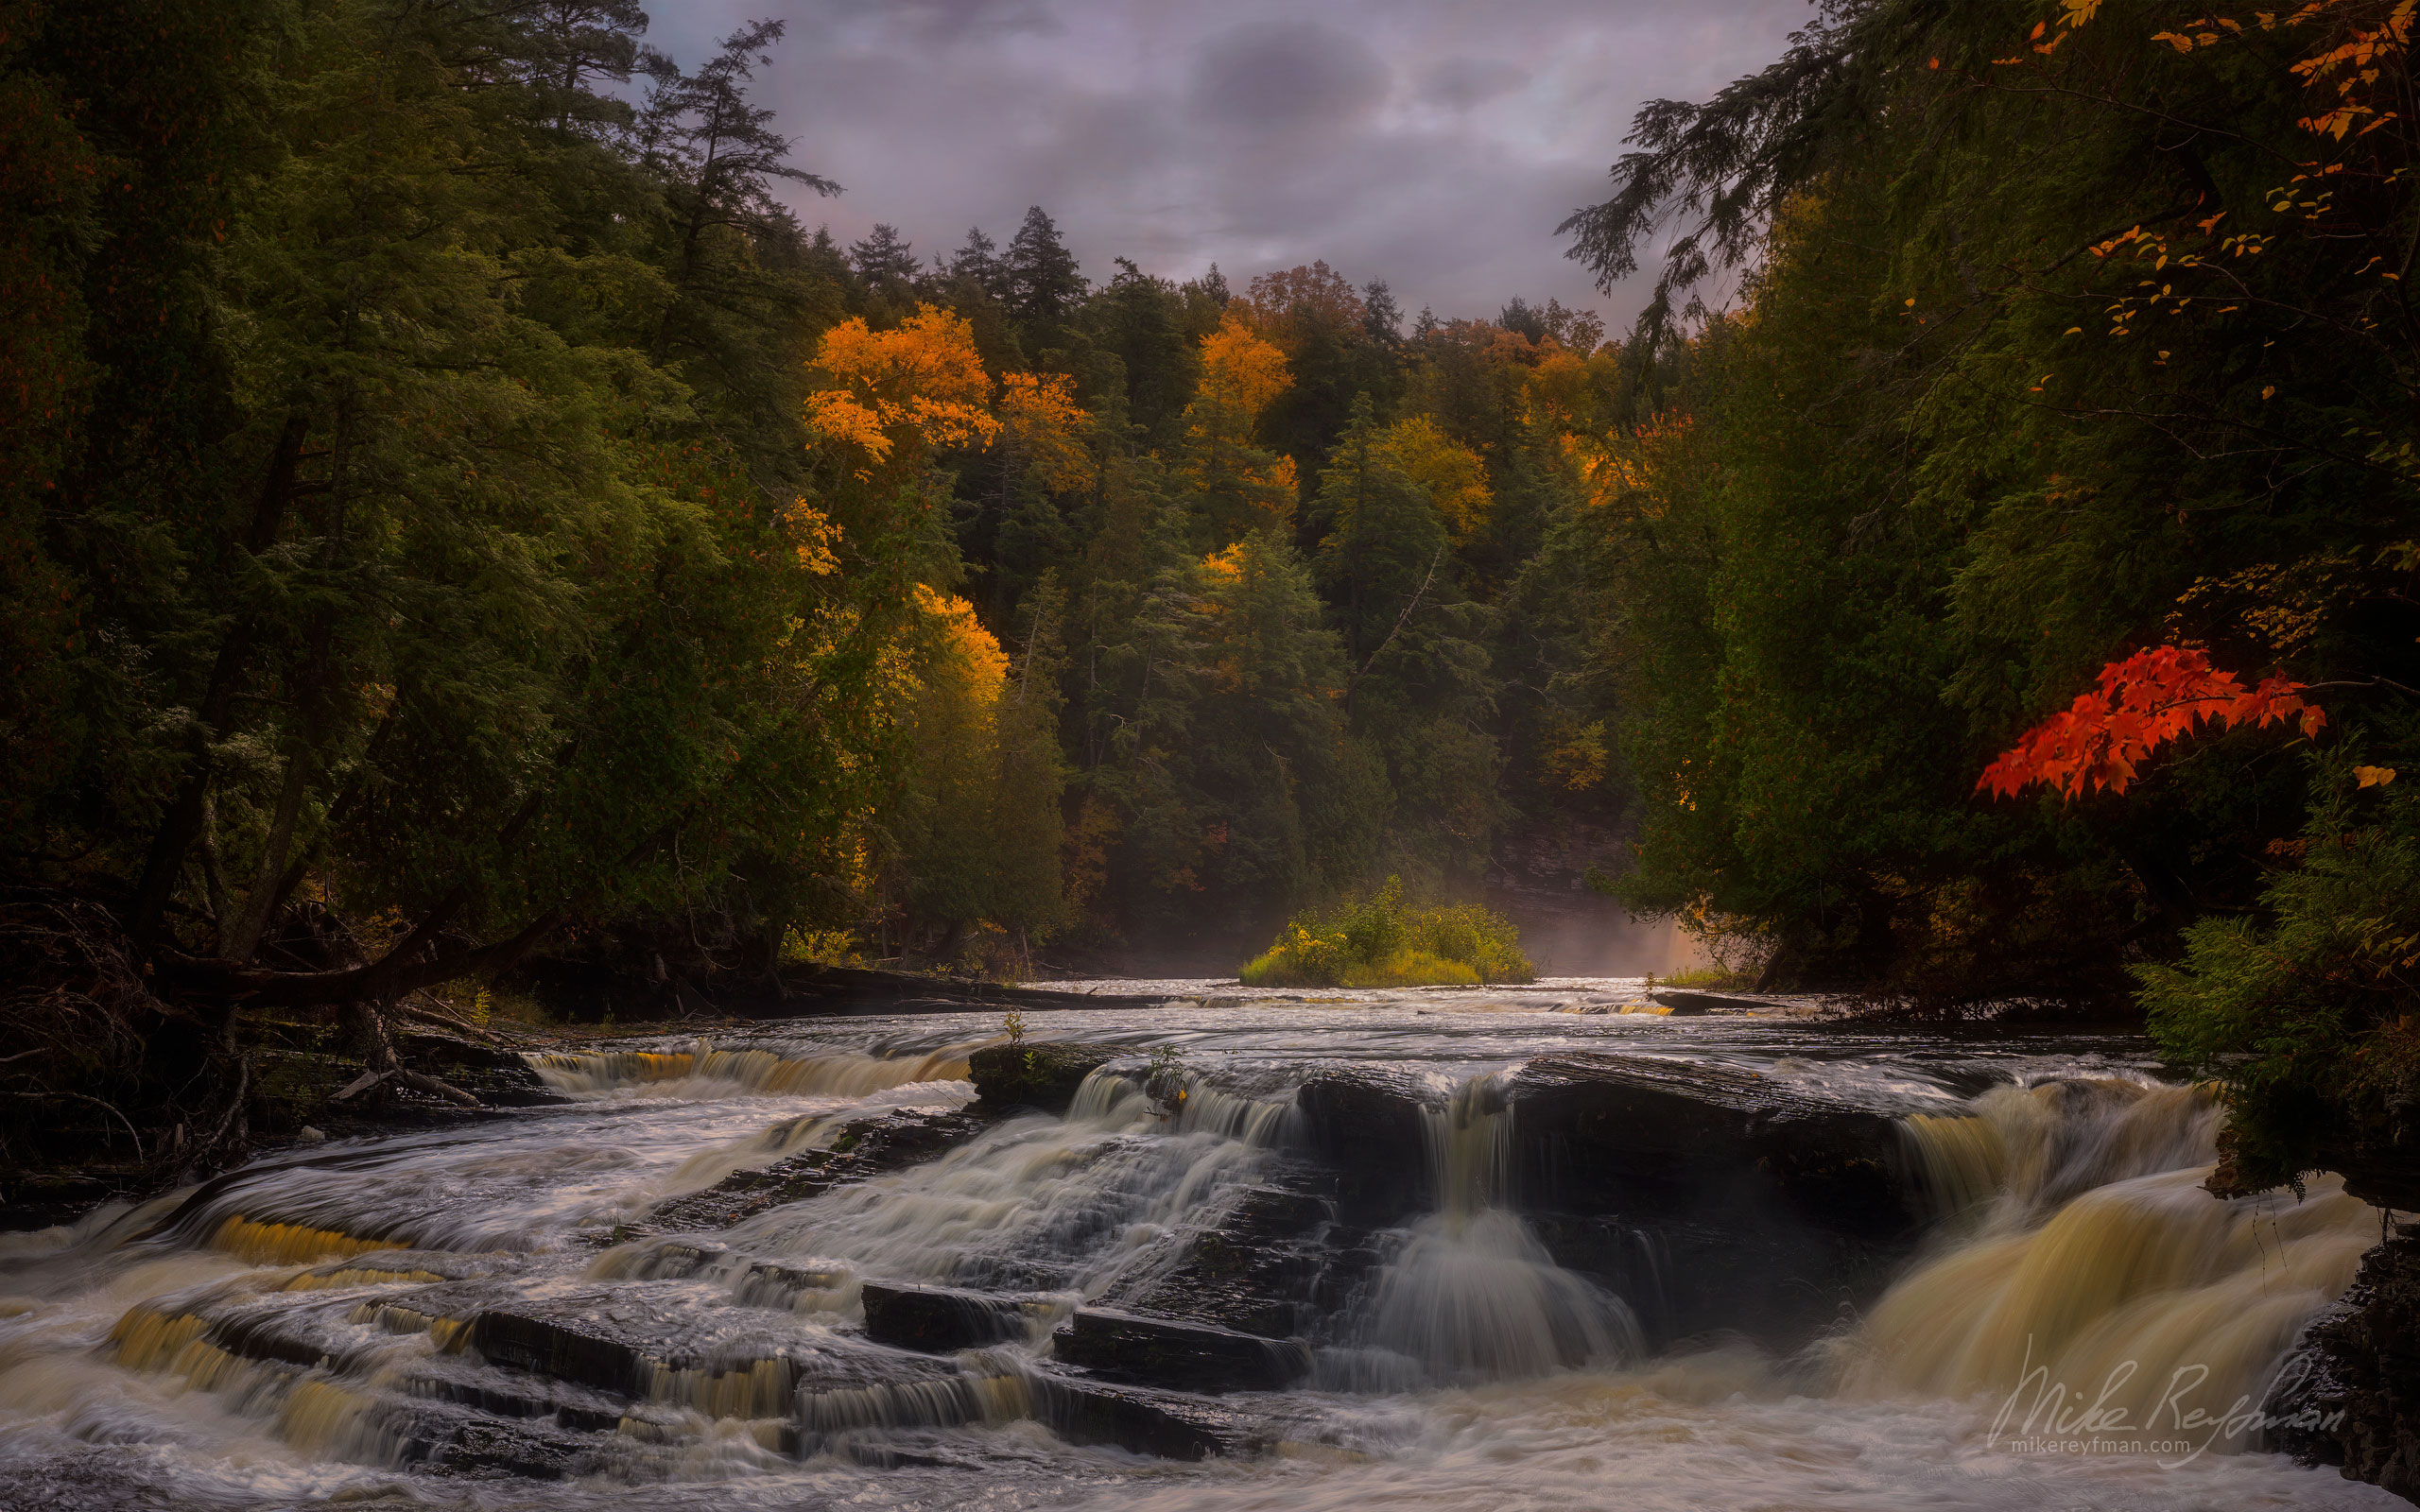 Presque Isle River, Porcupine Mountains, Upper Peninsula, Michigan, USA. UP-MI_033_ZRA7751.jpg - Michigan's Upper Peninsula - the best destination in US for fall colors. - Mike Reyfman Photography